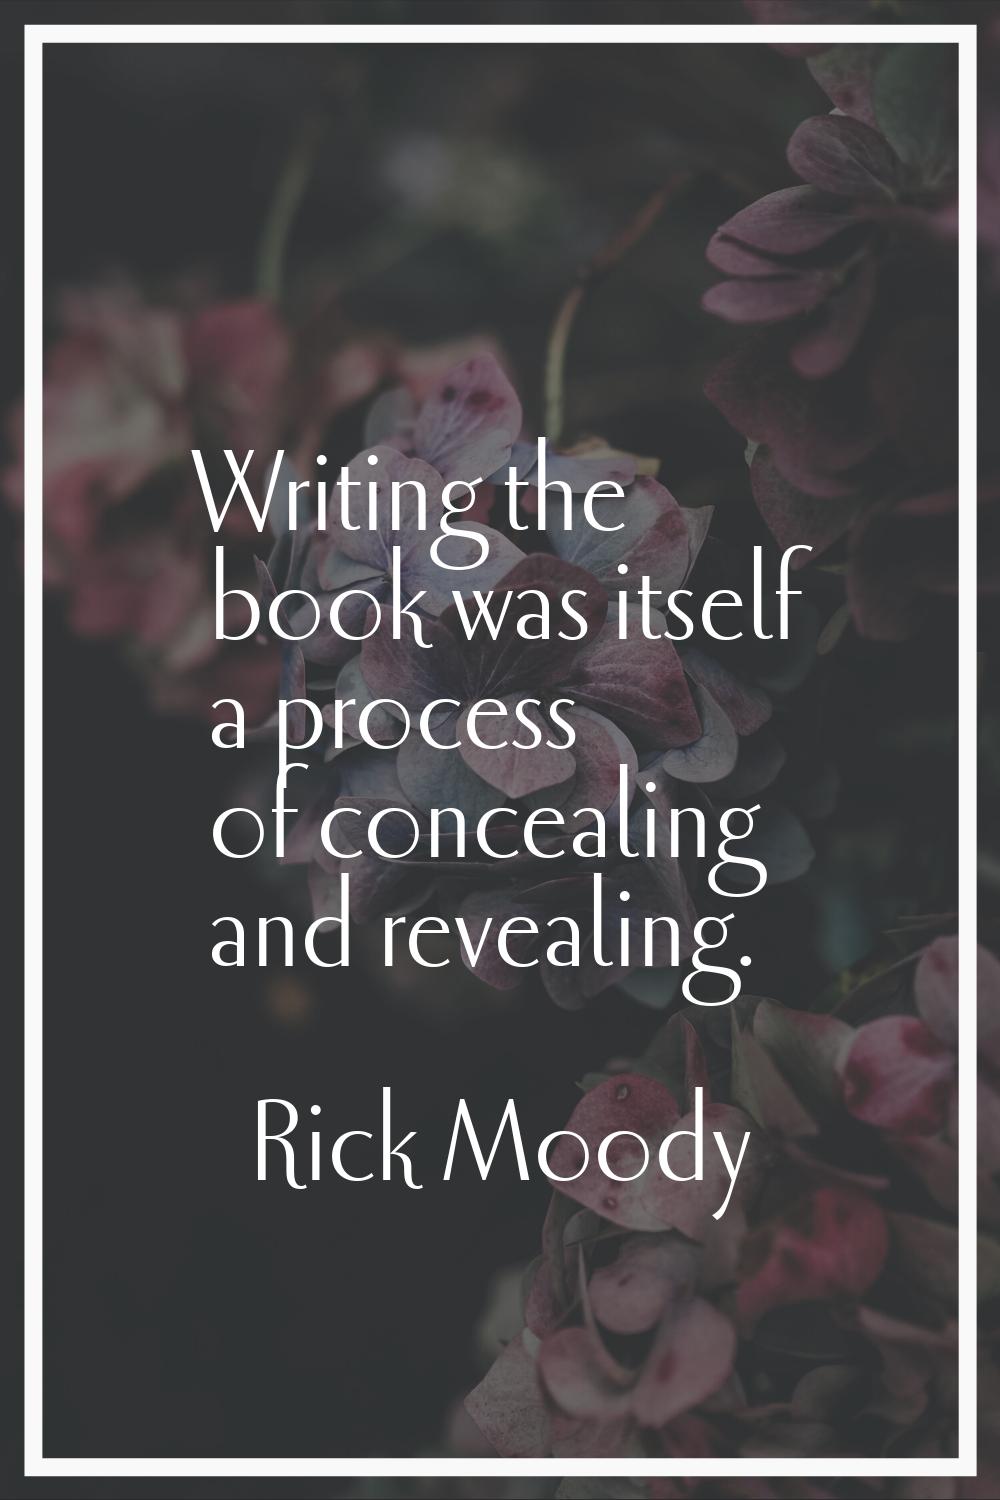 Writing the book was itself a process of concealing and revealing.